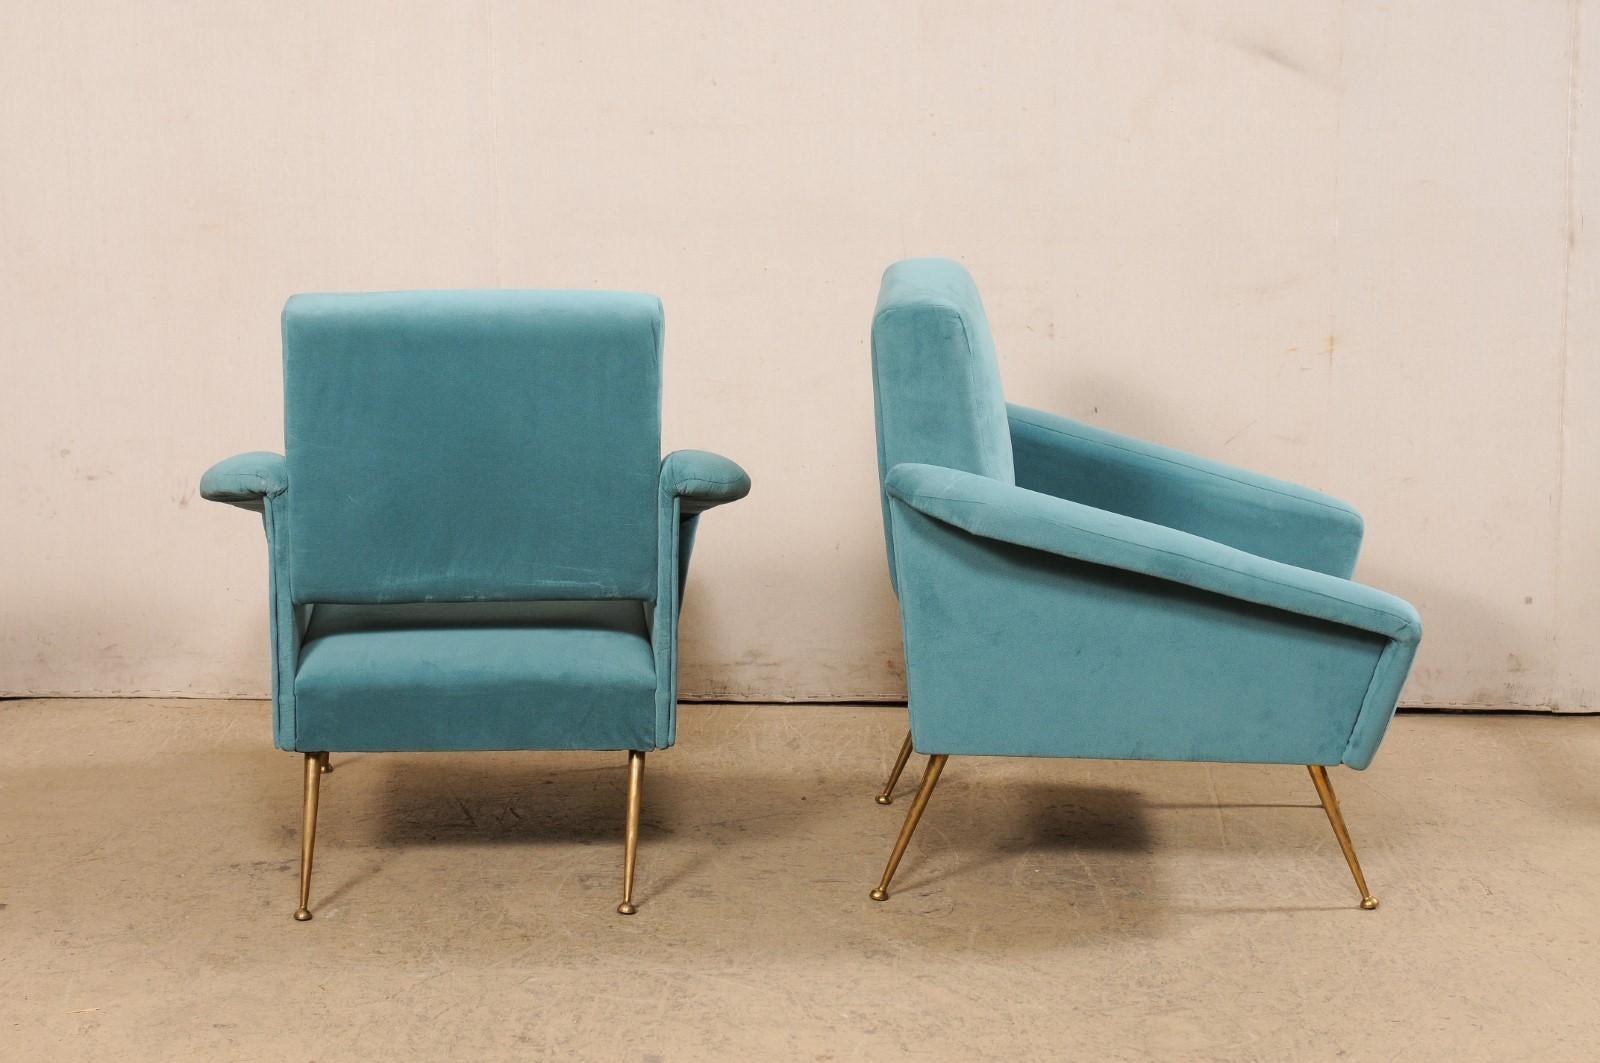 Italian Pair of Mid-Century Modern Upholstered Club Chairs For Sale 2